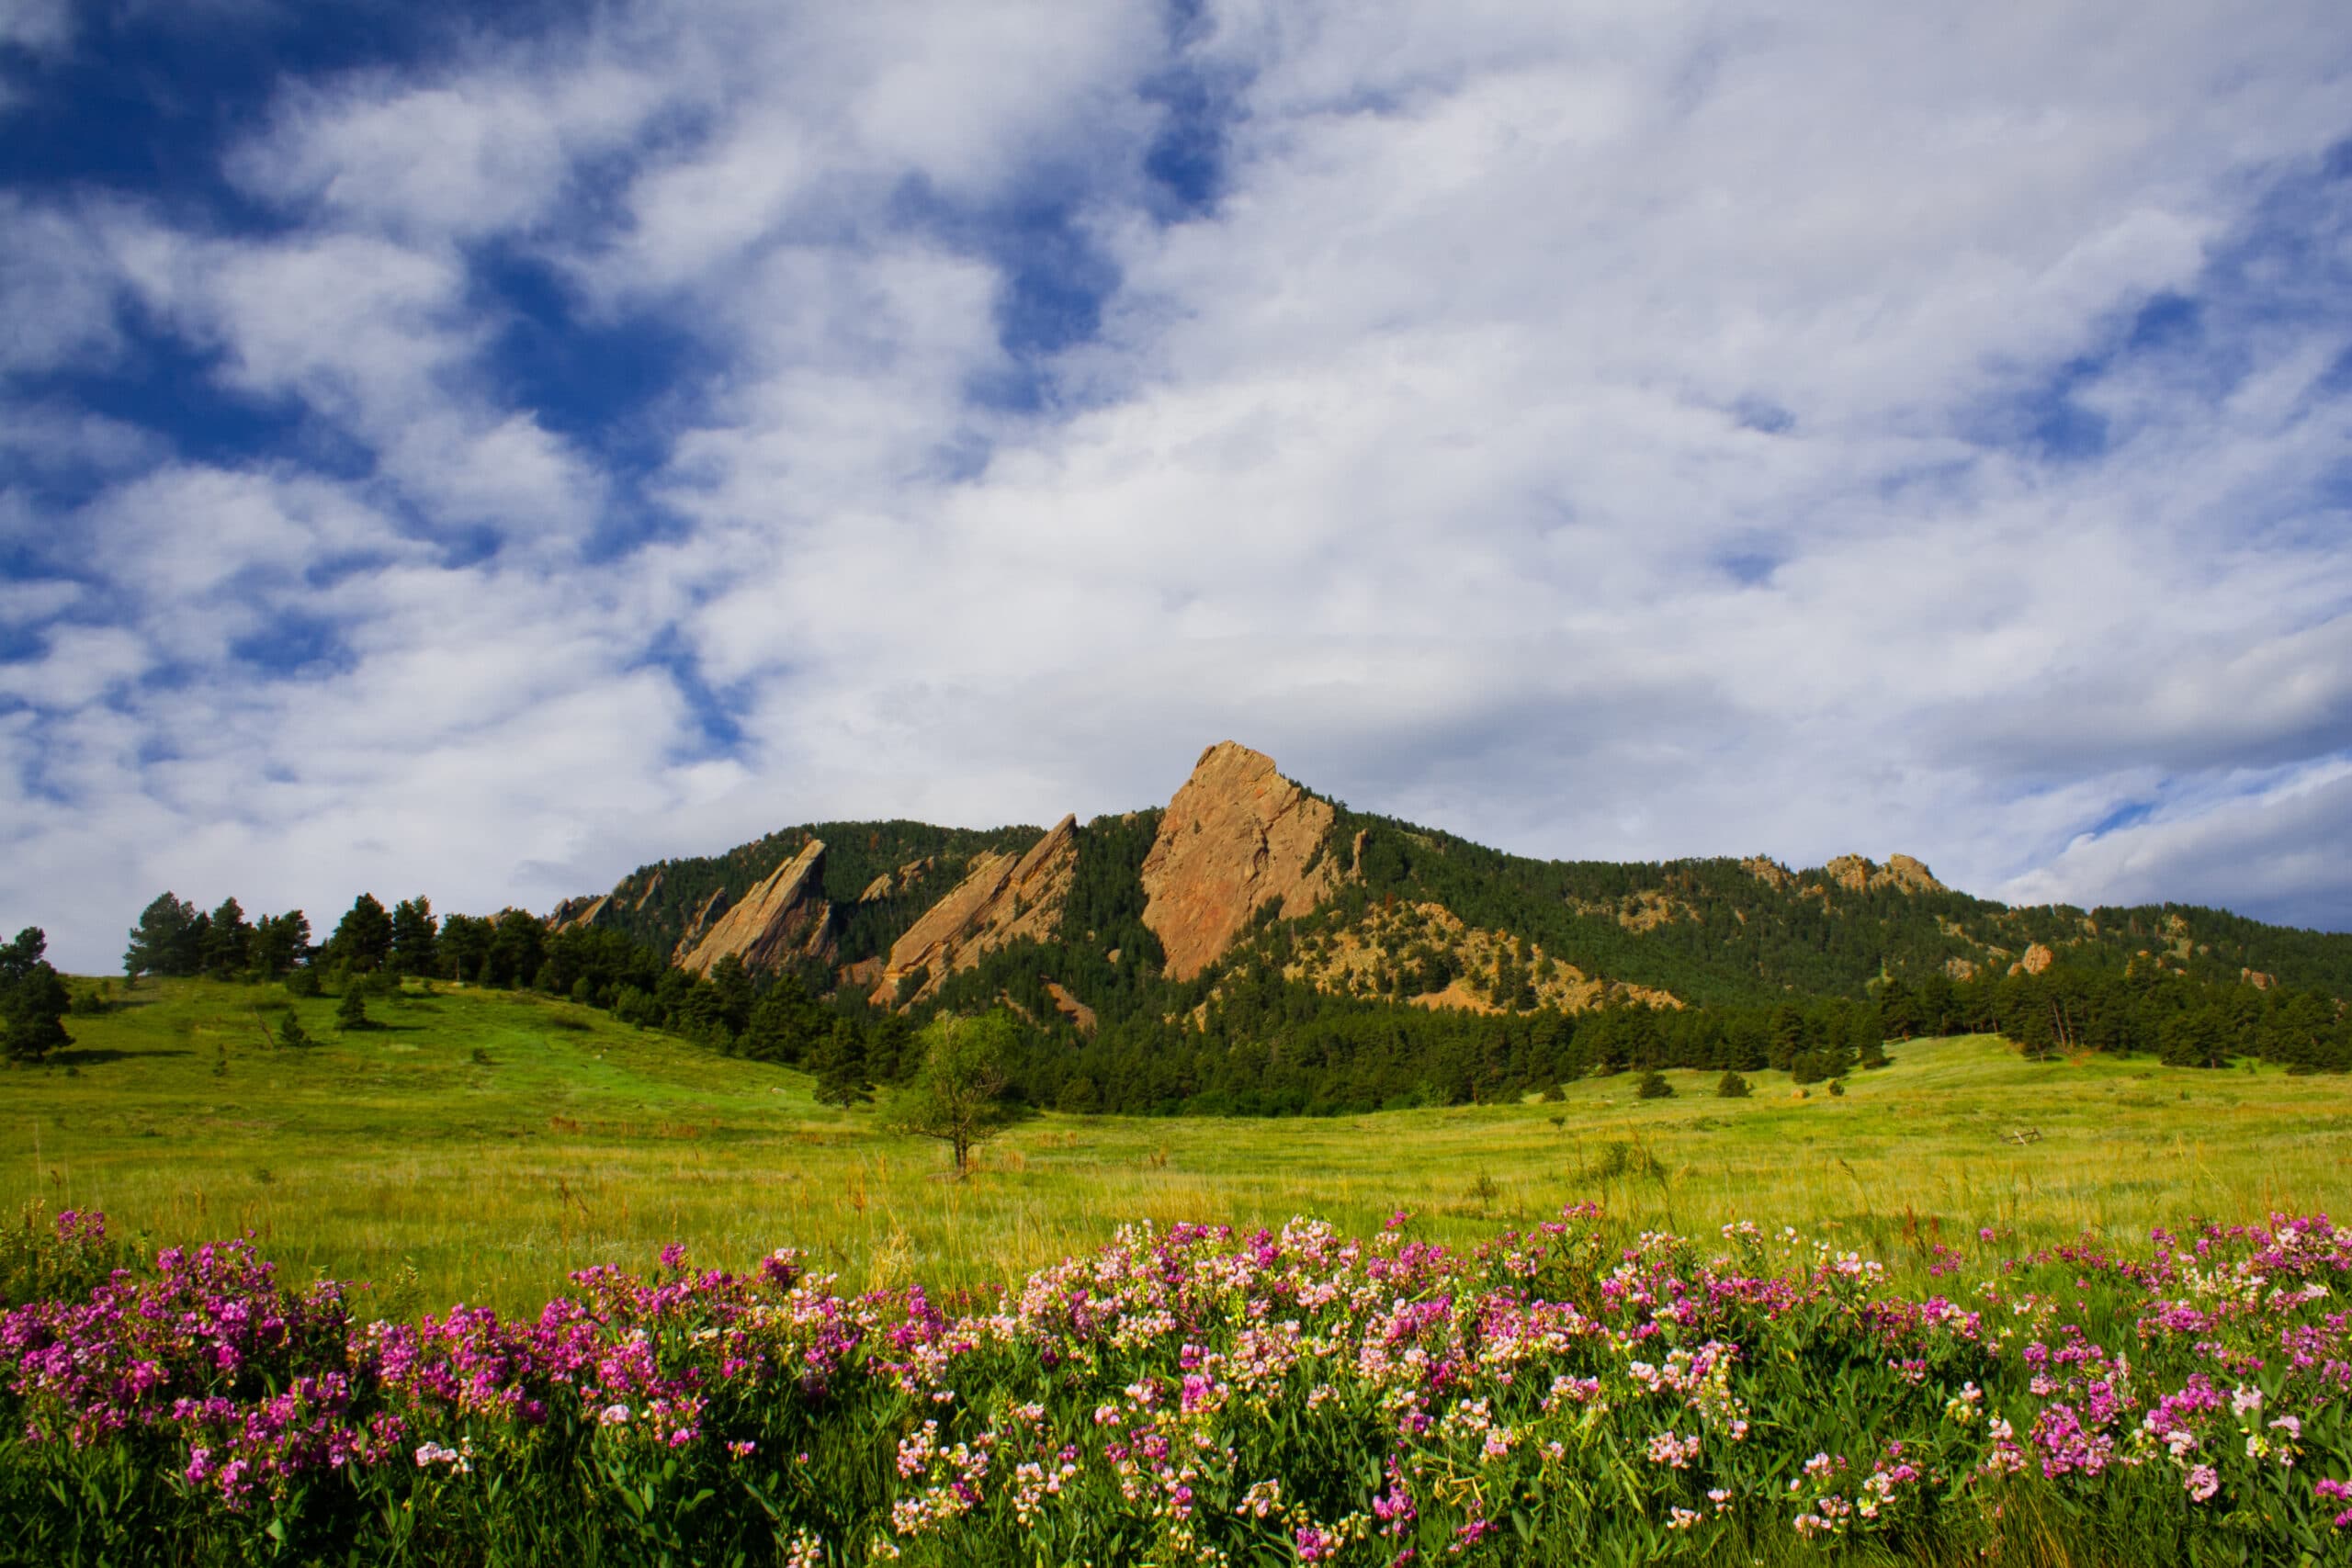 A summer morning in Boulder, Colorado with the Flatirons in the background and a bunch of purple and pink flowers in the foreground.